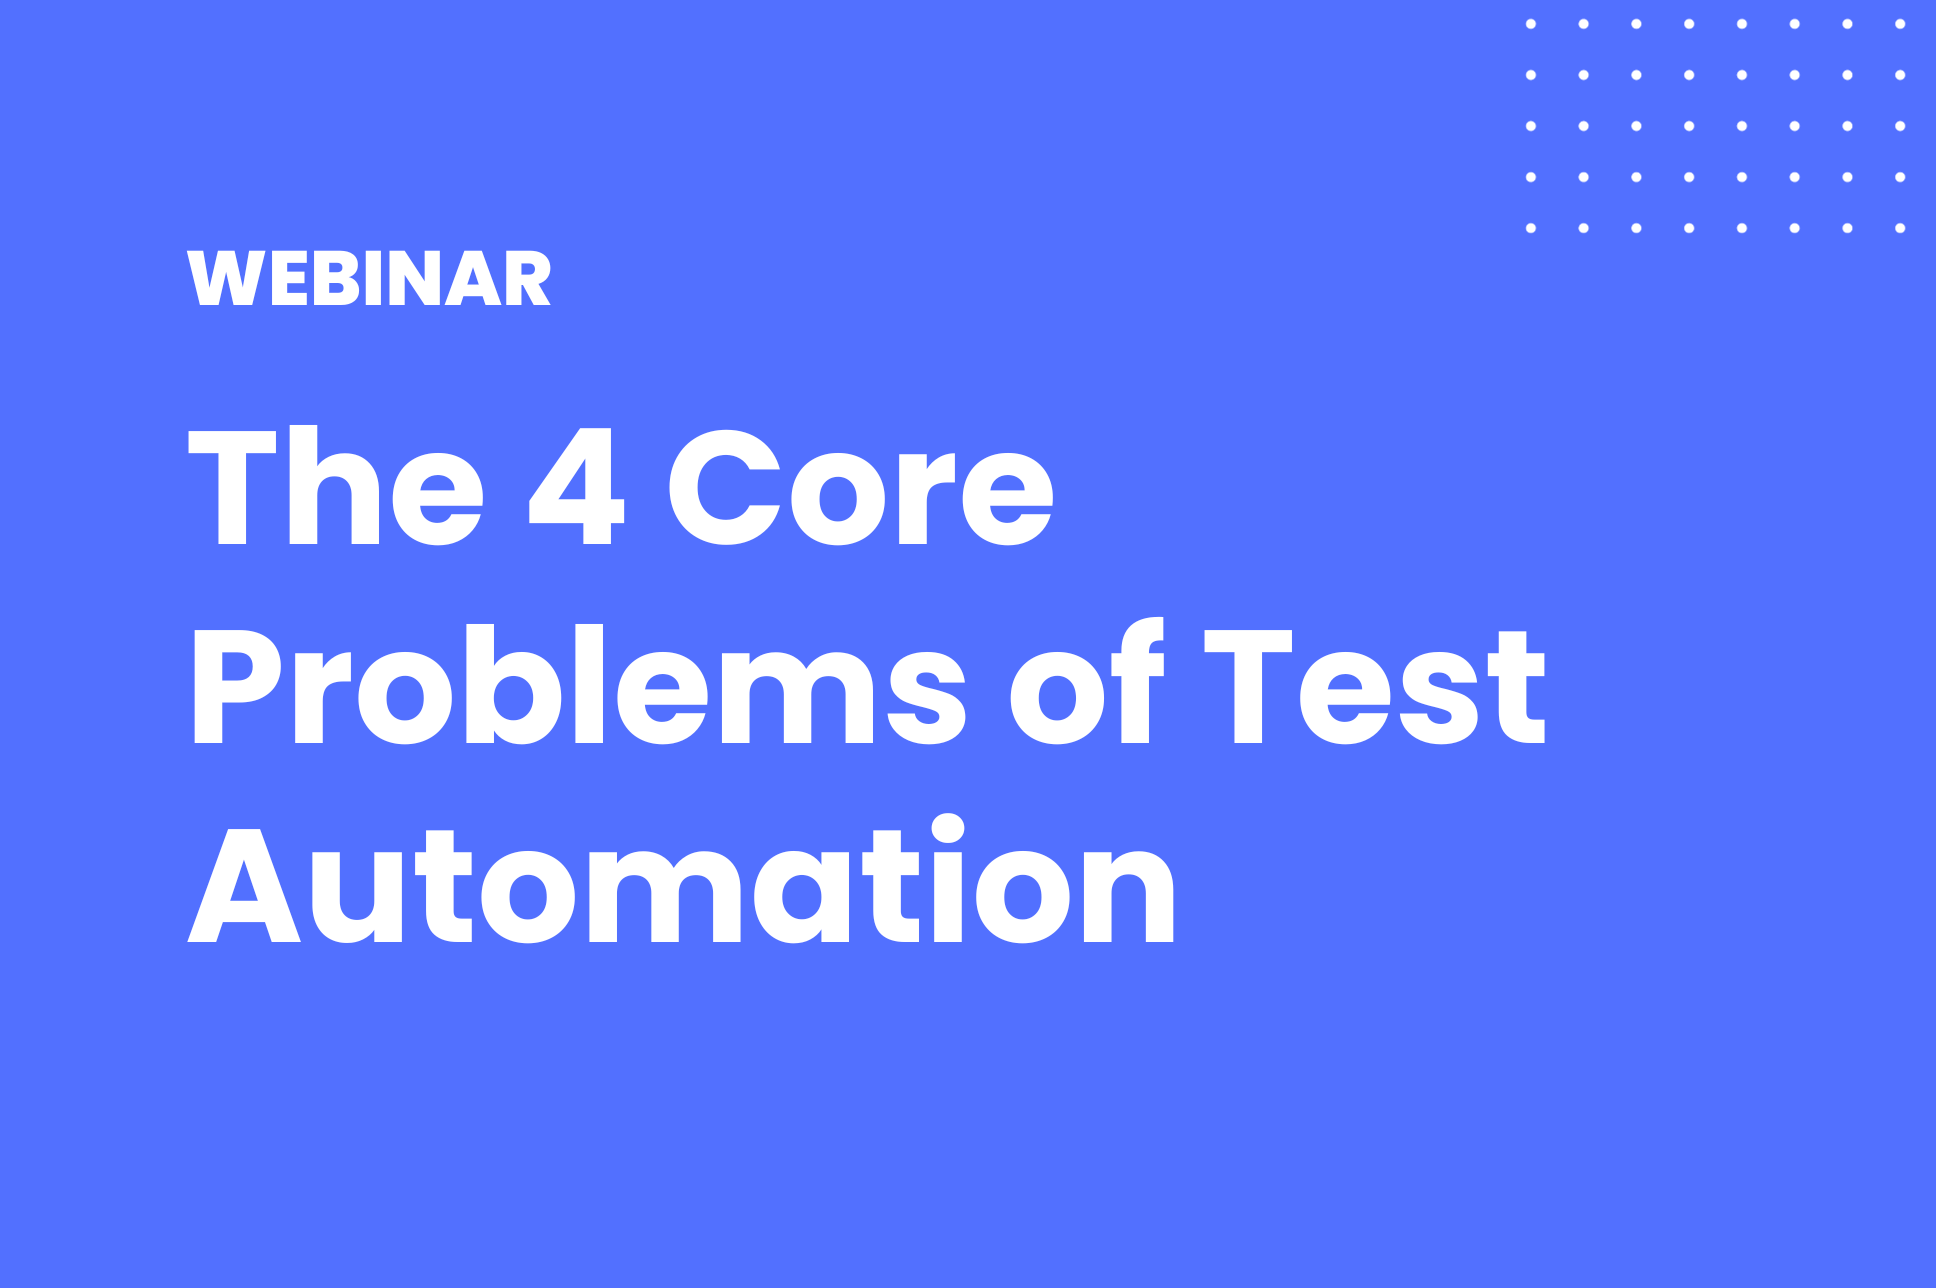 The 4 Core Problems of Test Automation